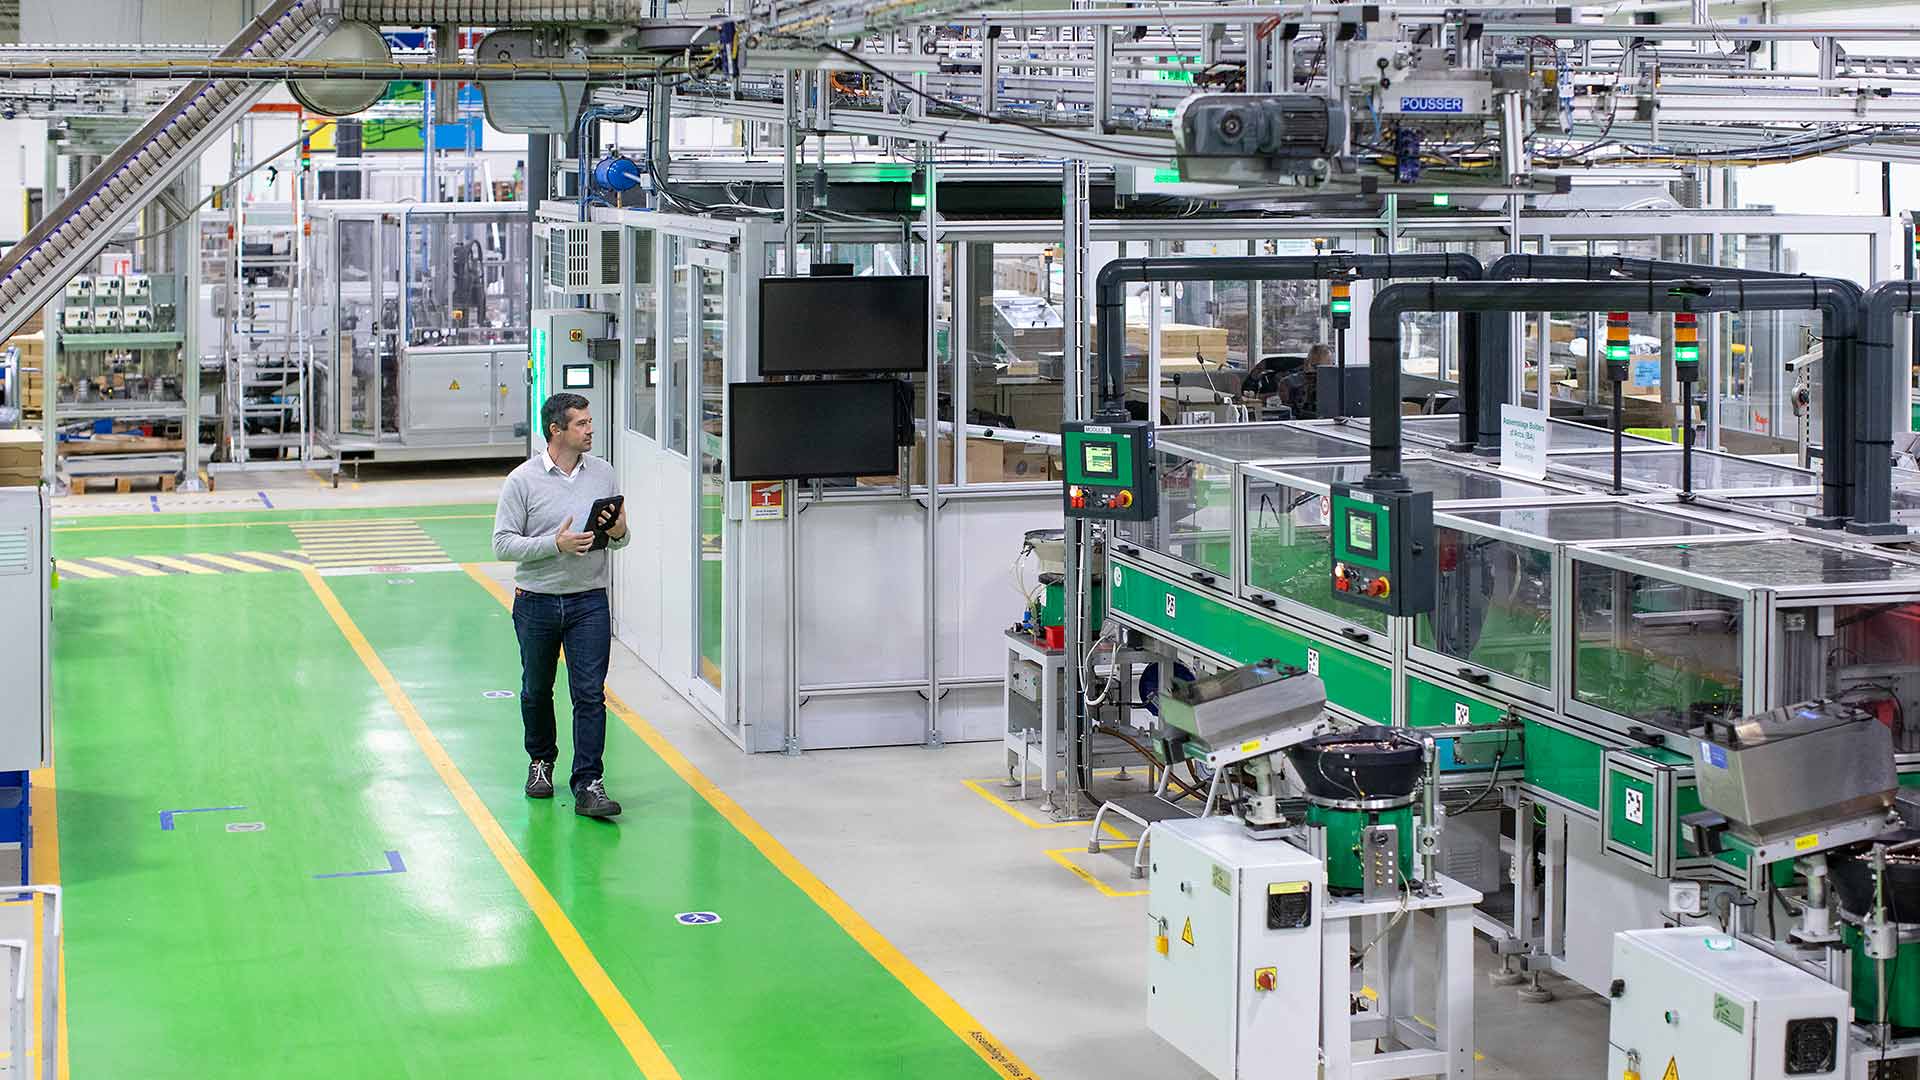 A man walking inside a smart factory while holding a digital tablet in hand.